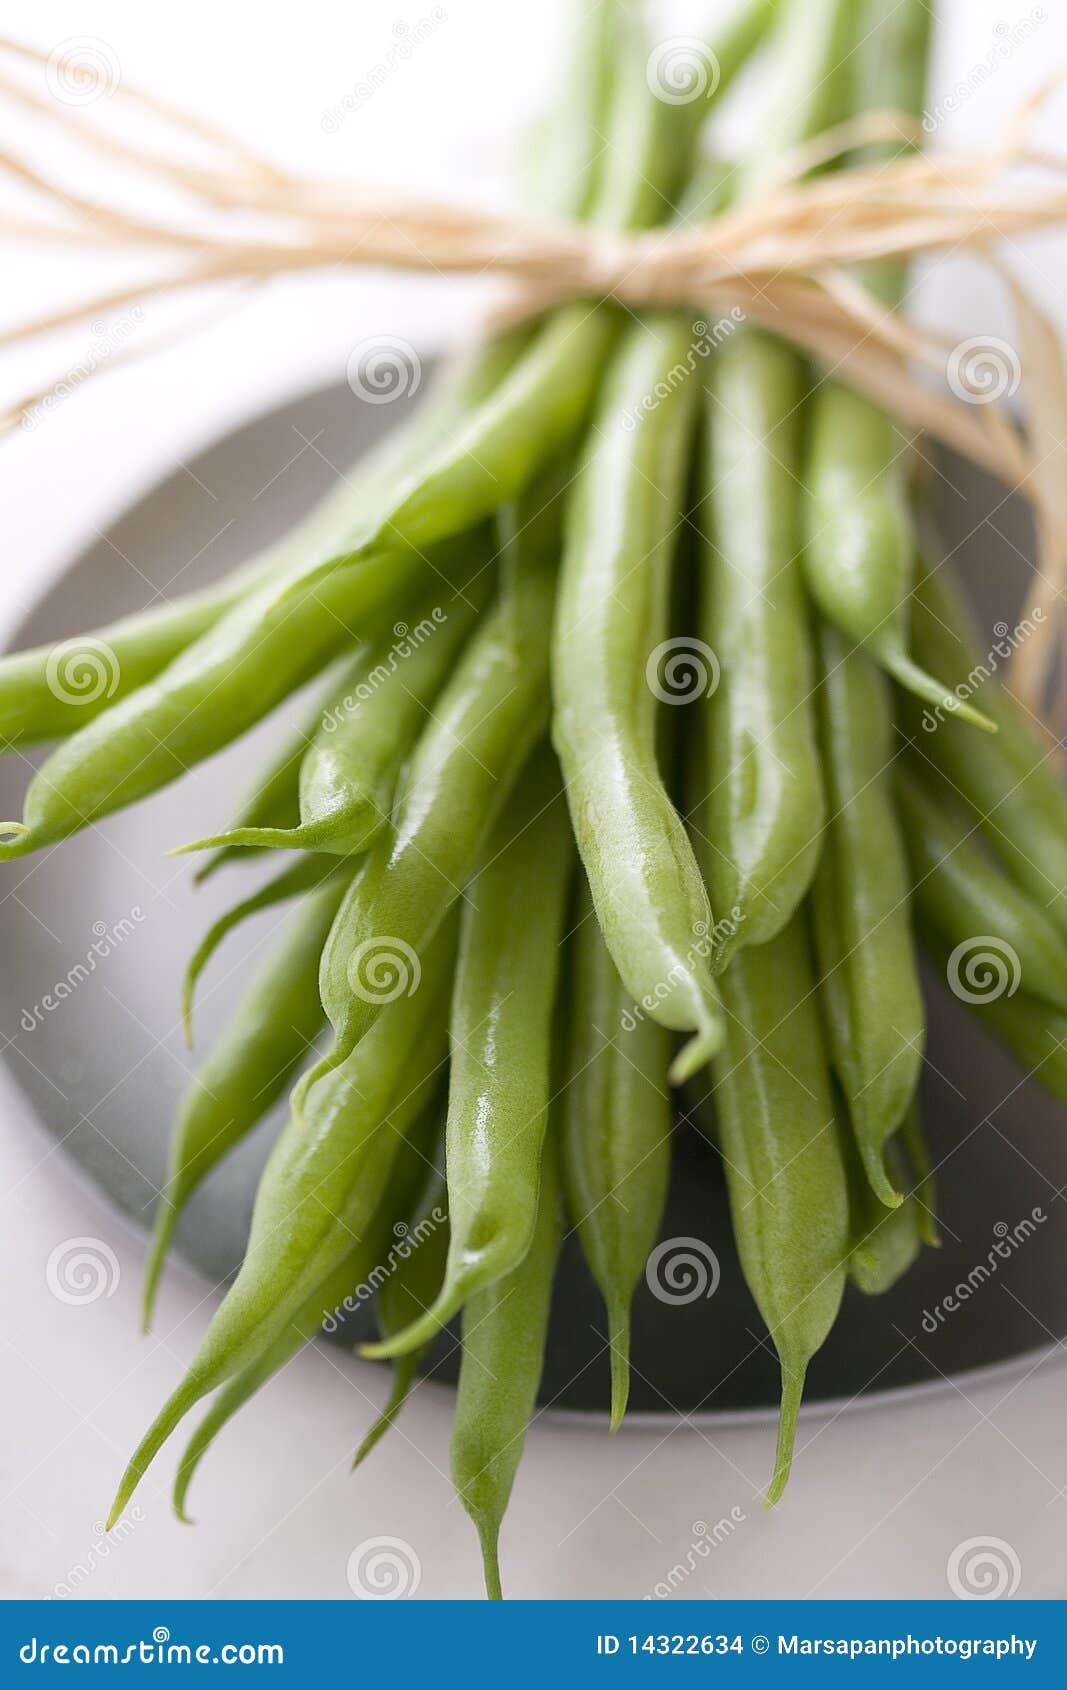 Green beans stock photo. Image of plant, greenbeans, diet - 14322634